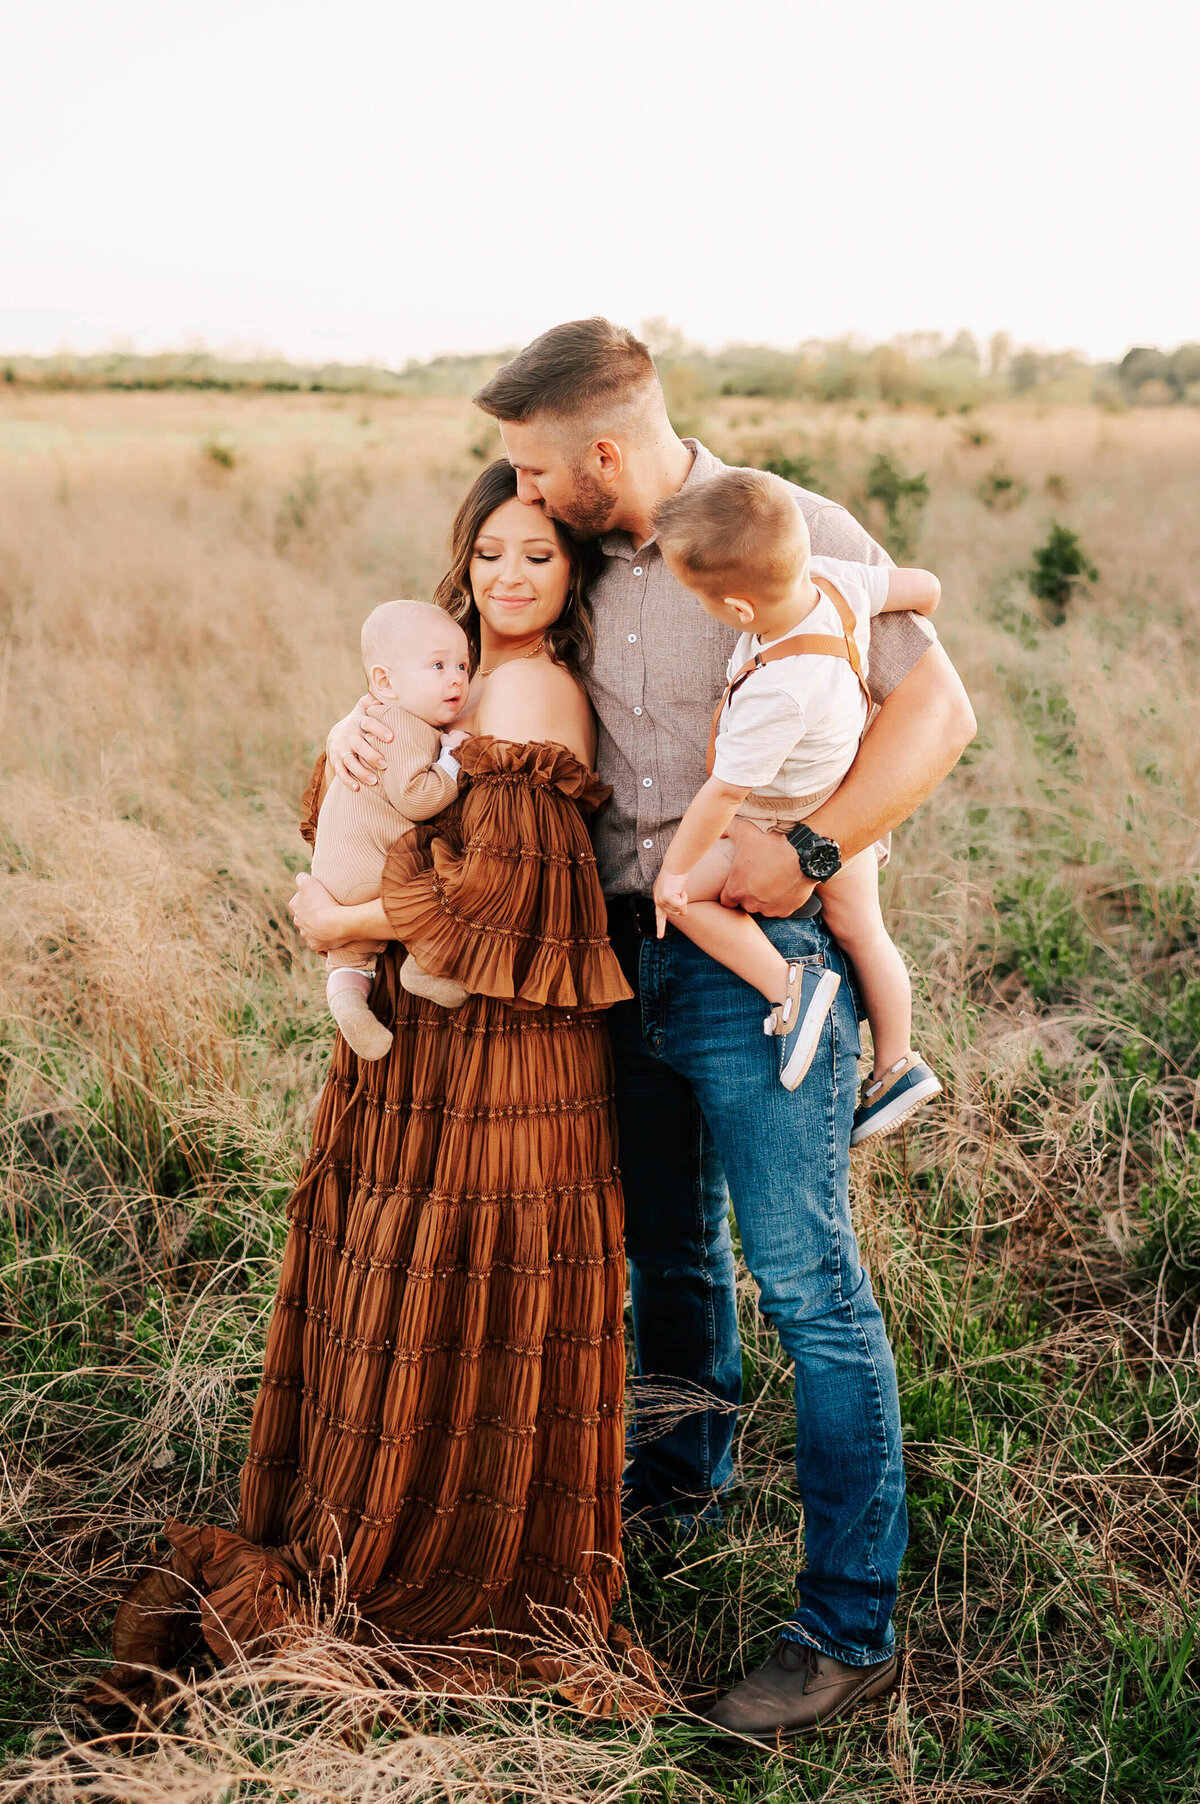 Branson MO family photographer Jessica Kennedy of The XO Photography captures family cuddling in a field